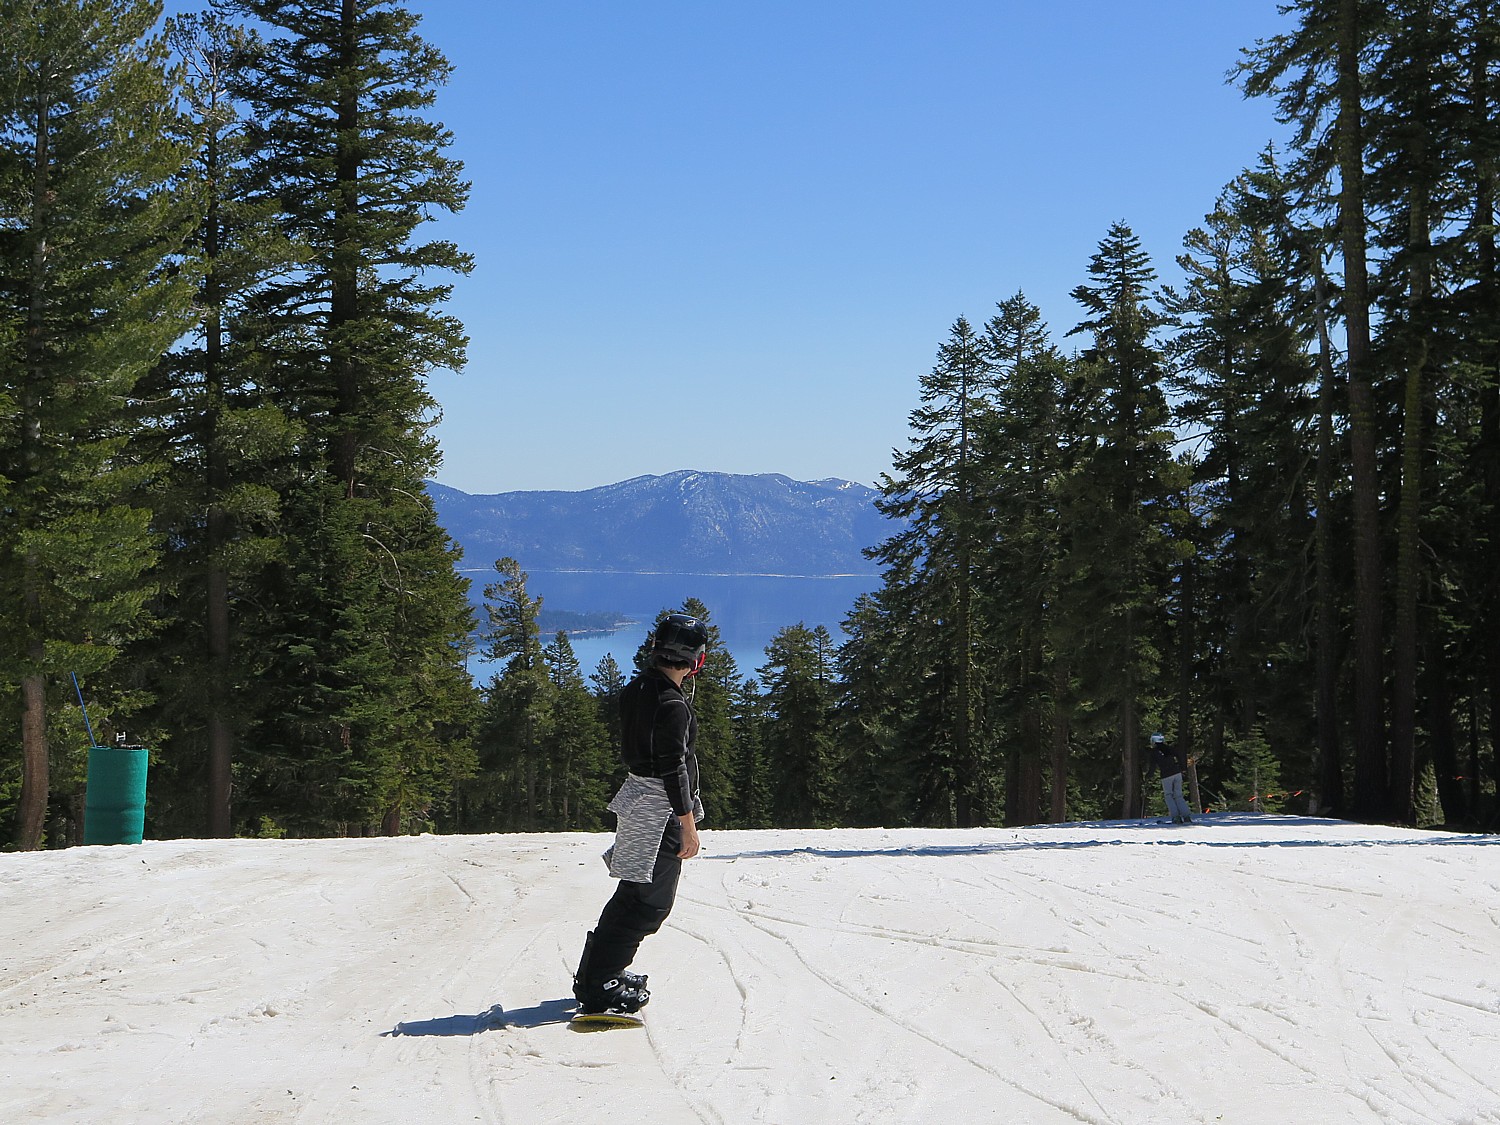 Enjoy unlimited skiing at Northstar at Lake Tahoe, California, with Vail Resorts’ Epic Pass, including the Epic-4 Day Pass © 2016 Karen Rubin/goingplacesfarandnear.com 